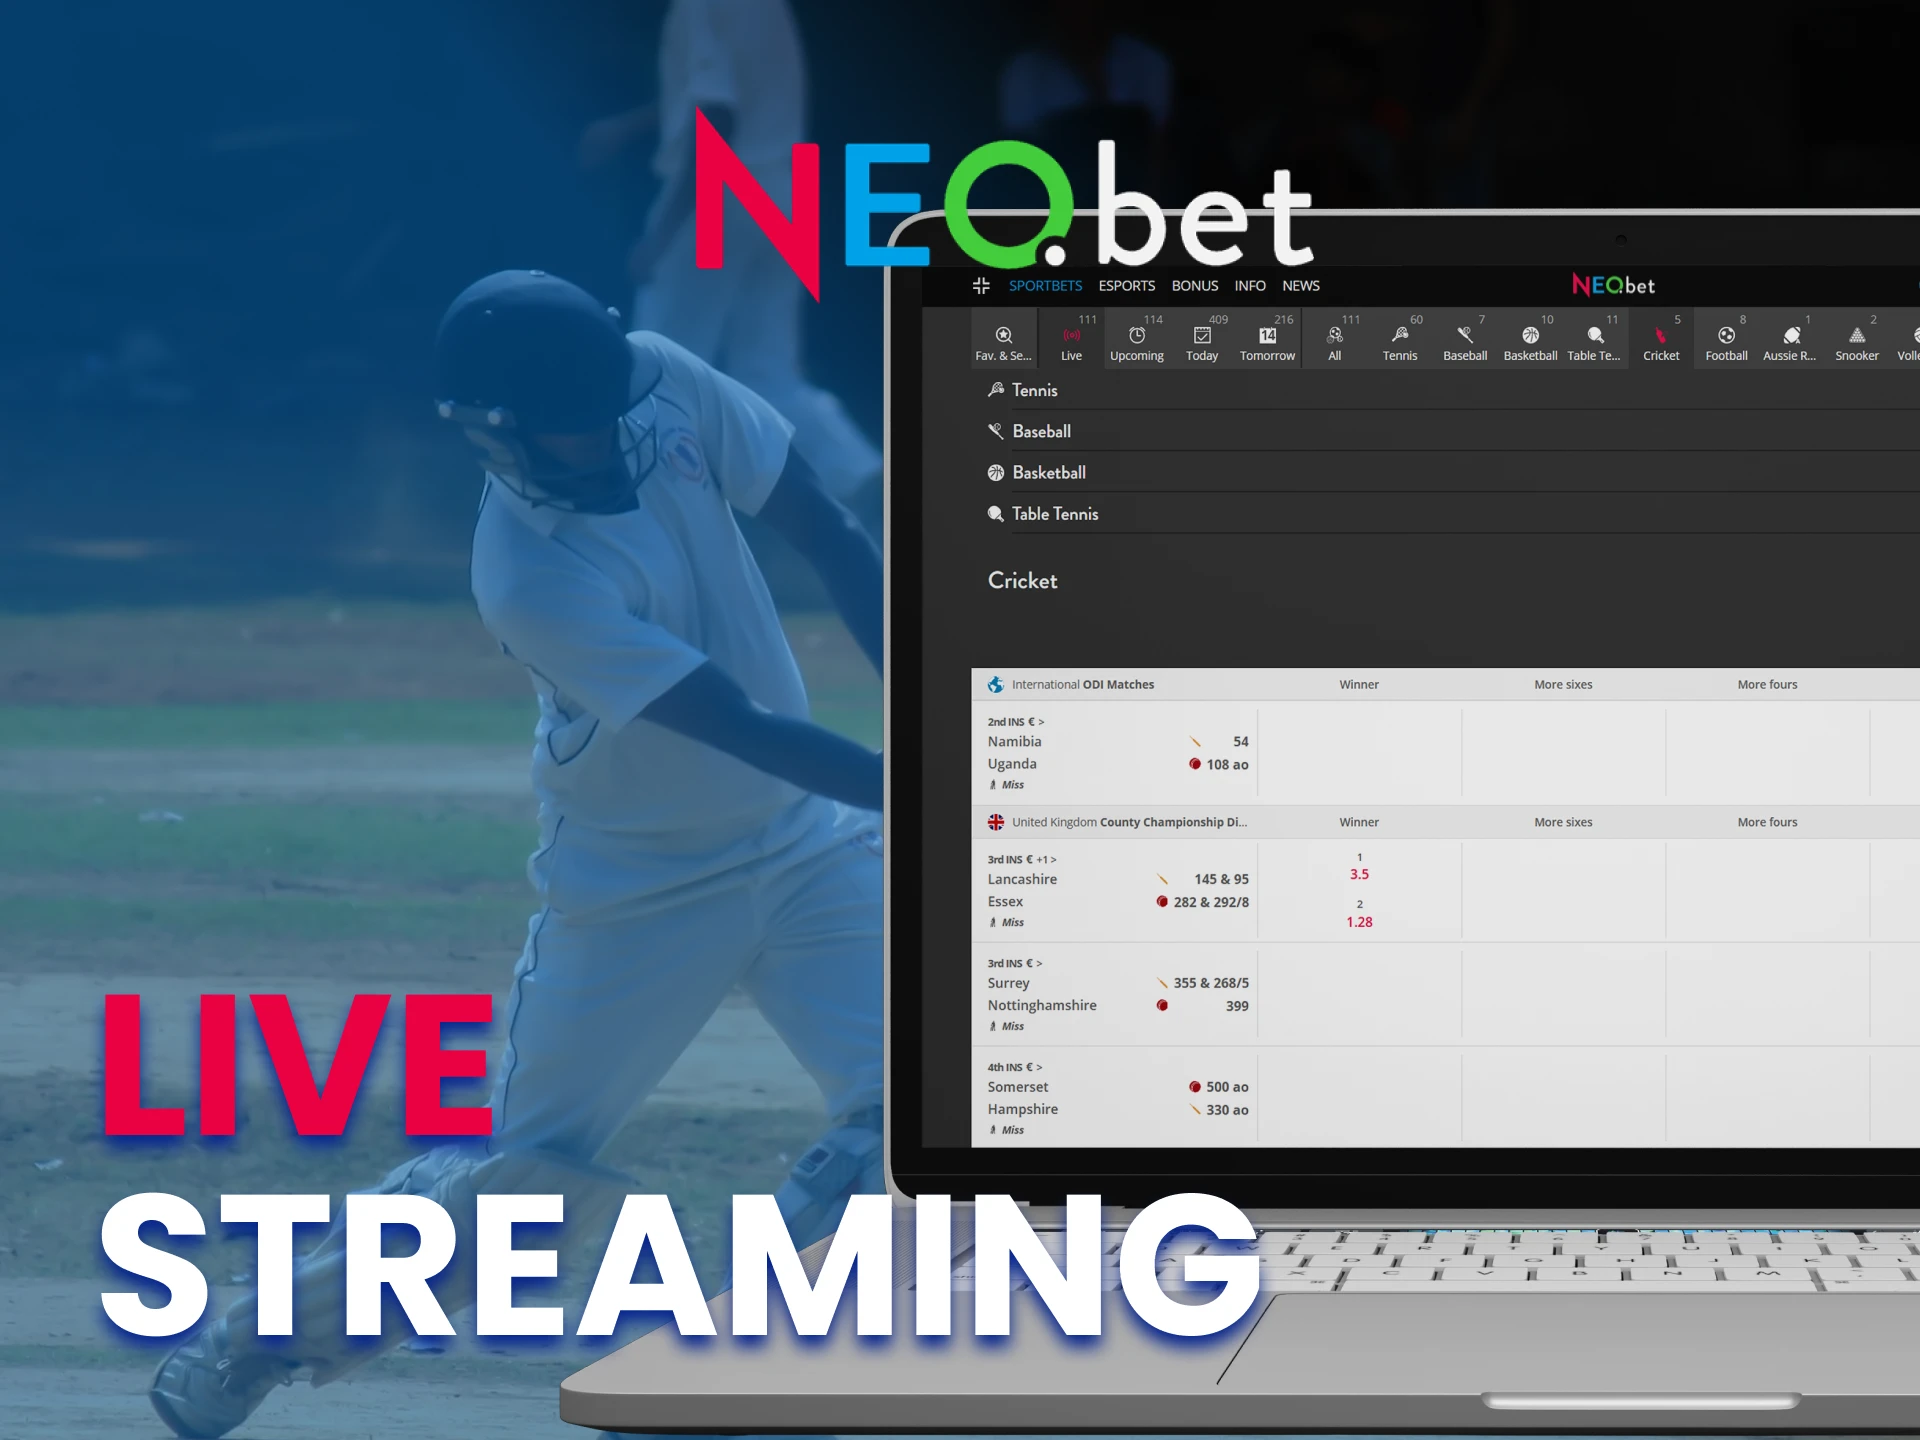 Watch match streaming with NEO.bet.